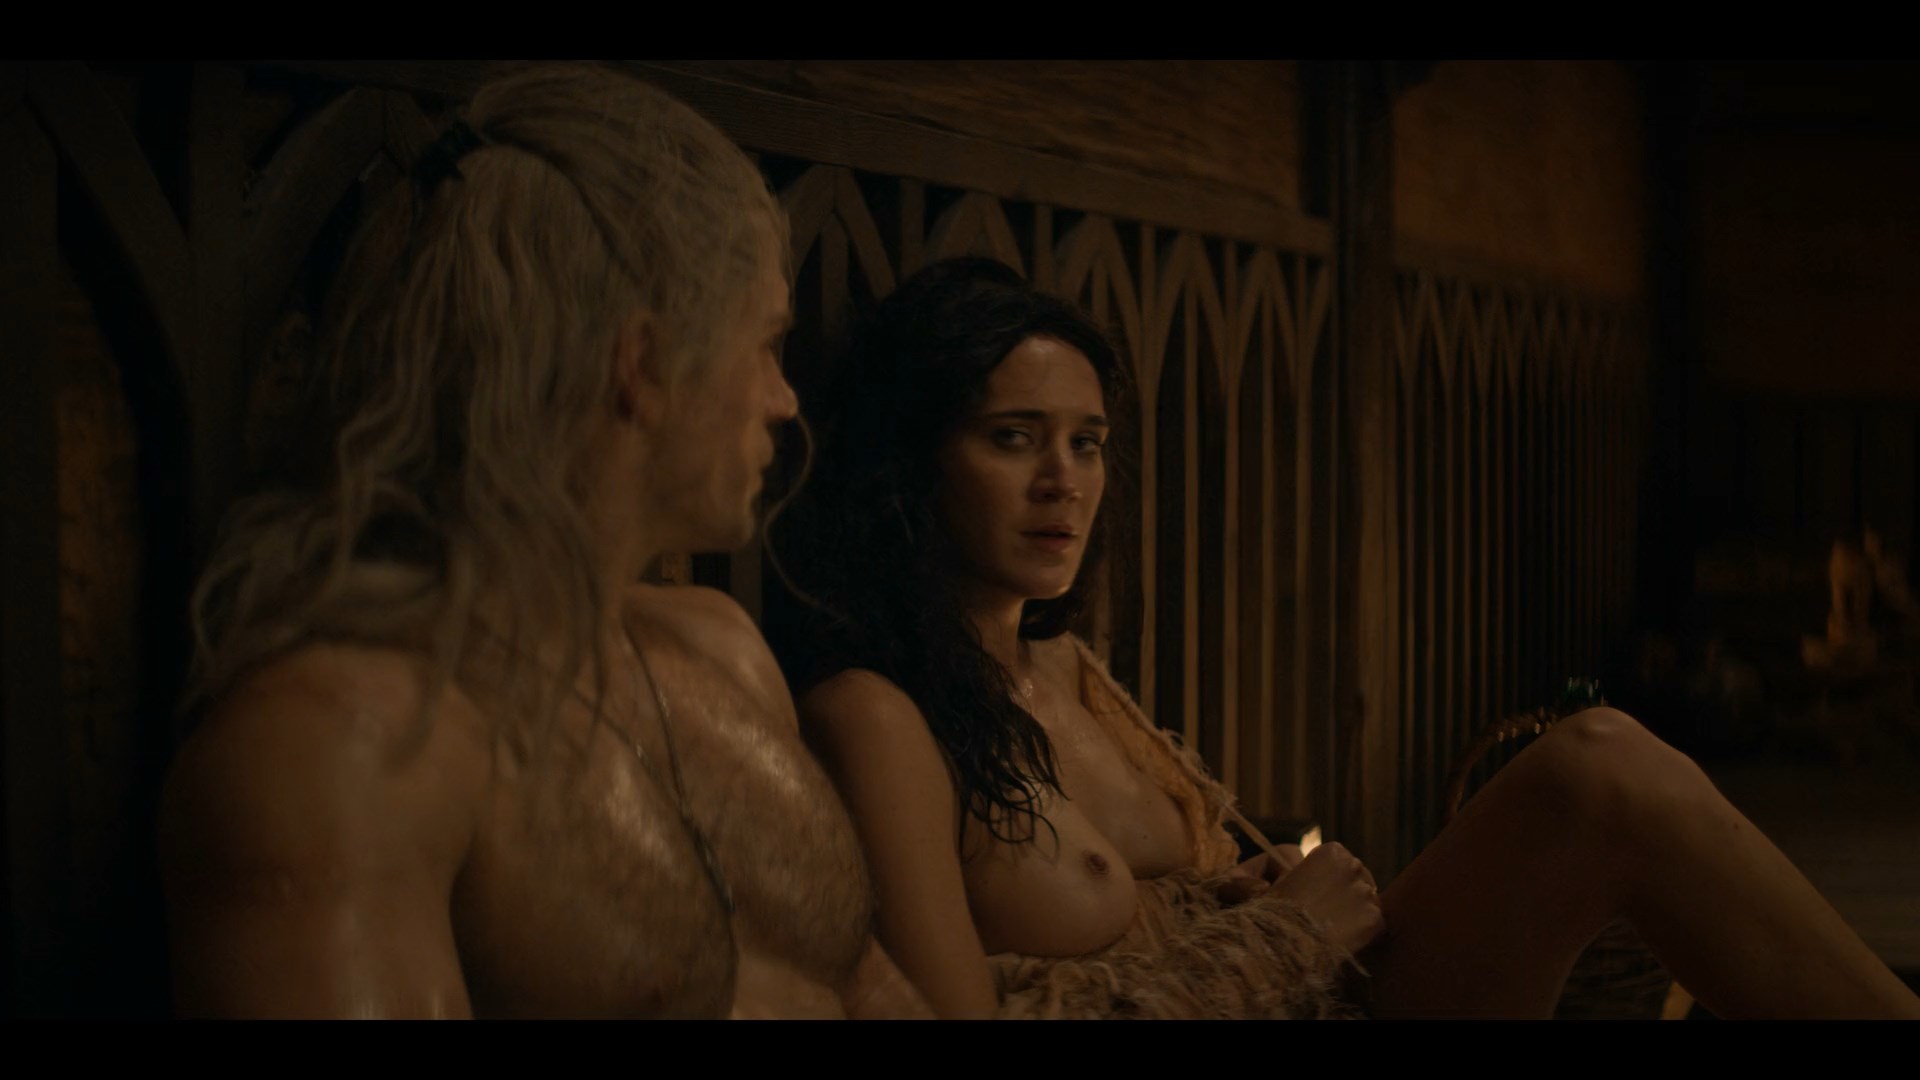 Anya Chalotra, Imogen Daines - The Witcher S1 - 1080p.